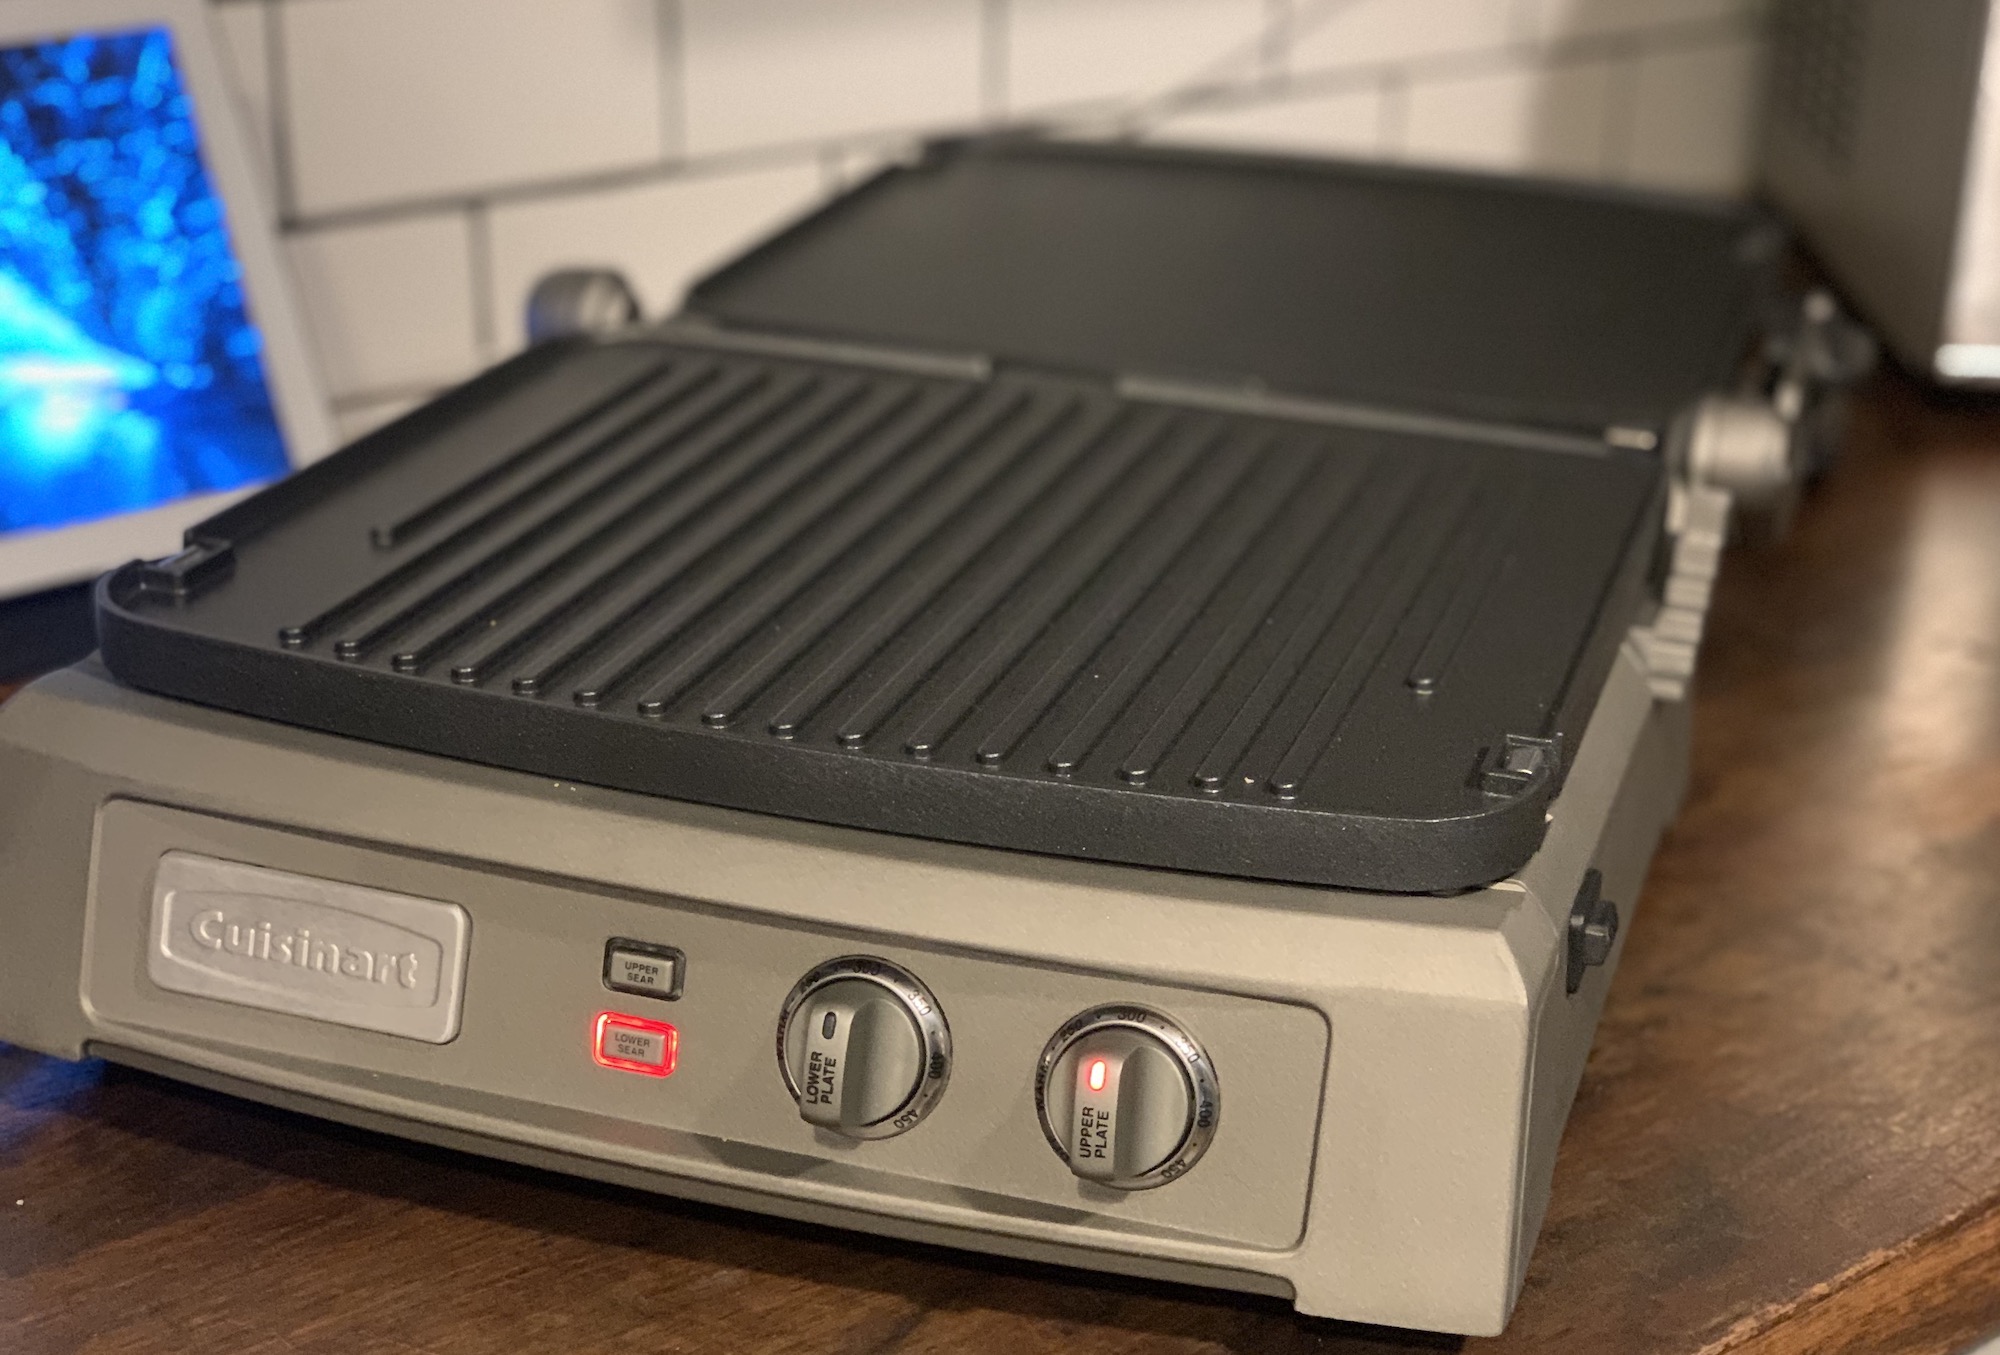 Cuisinart Griddler Contact Grill Deluxe + Reviews